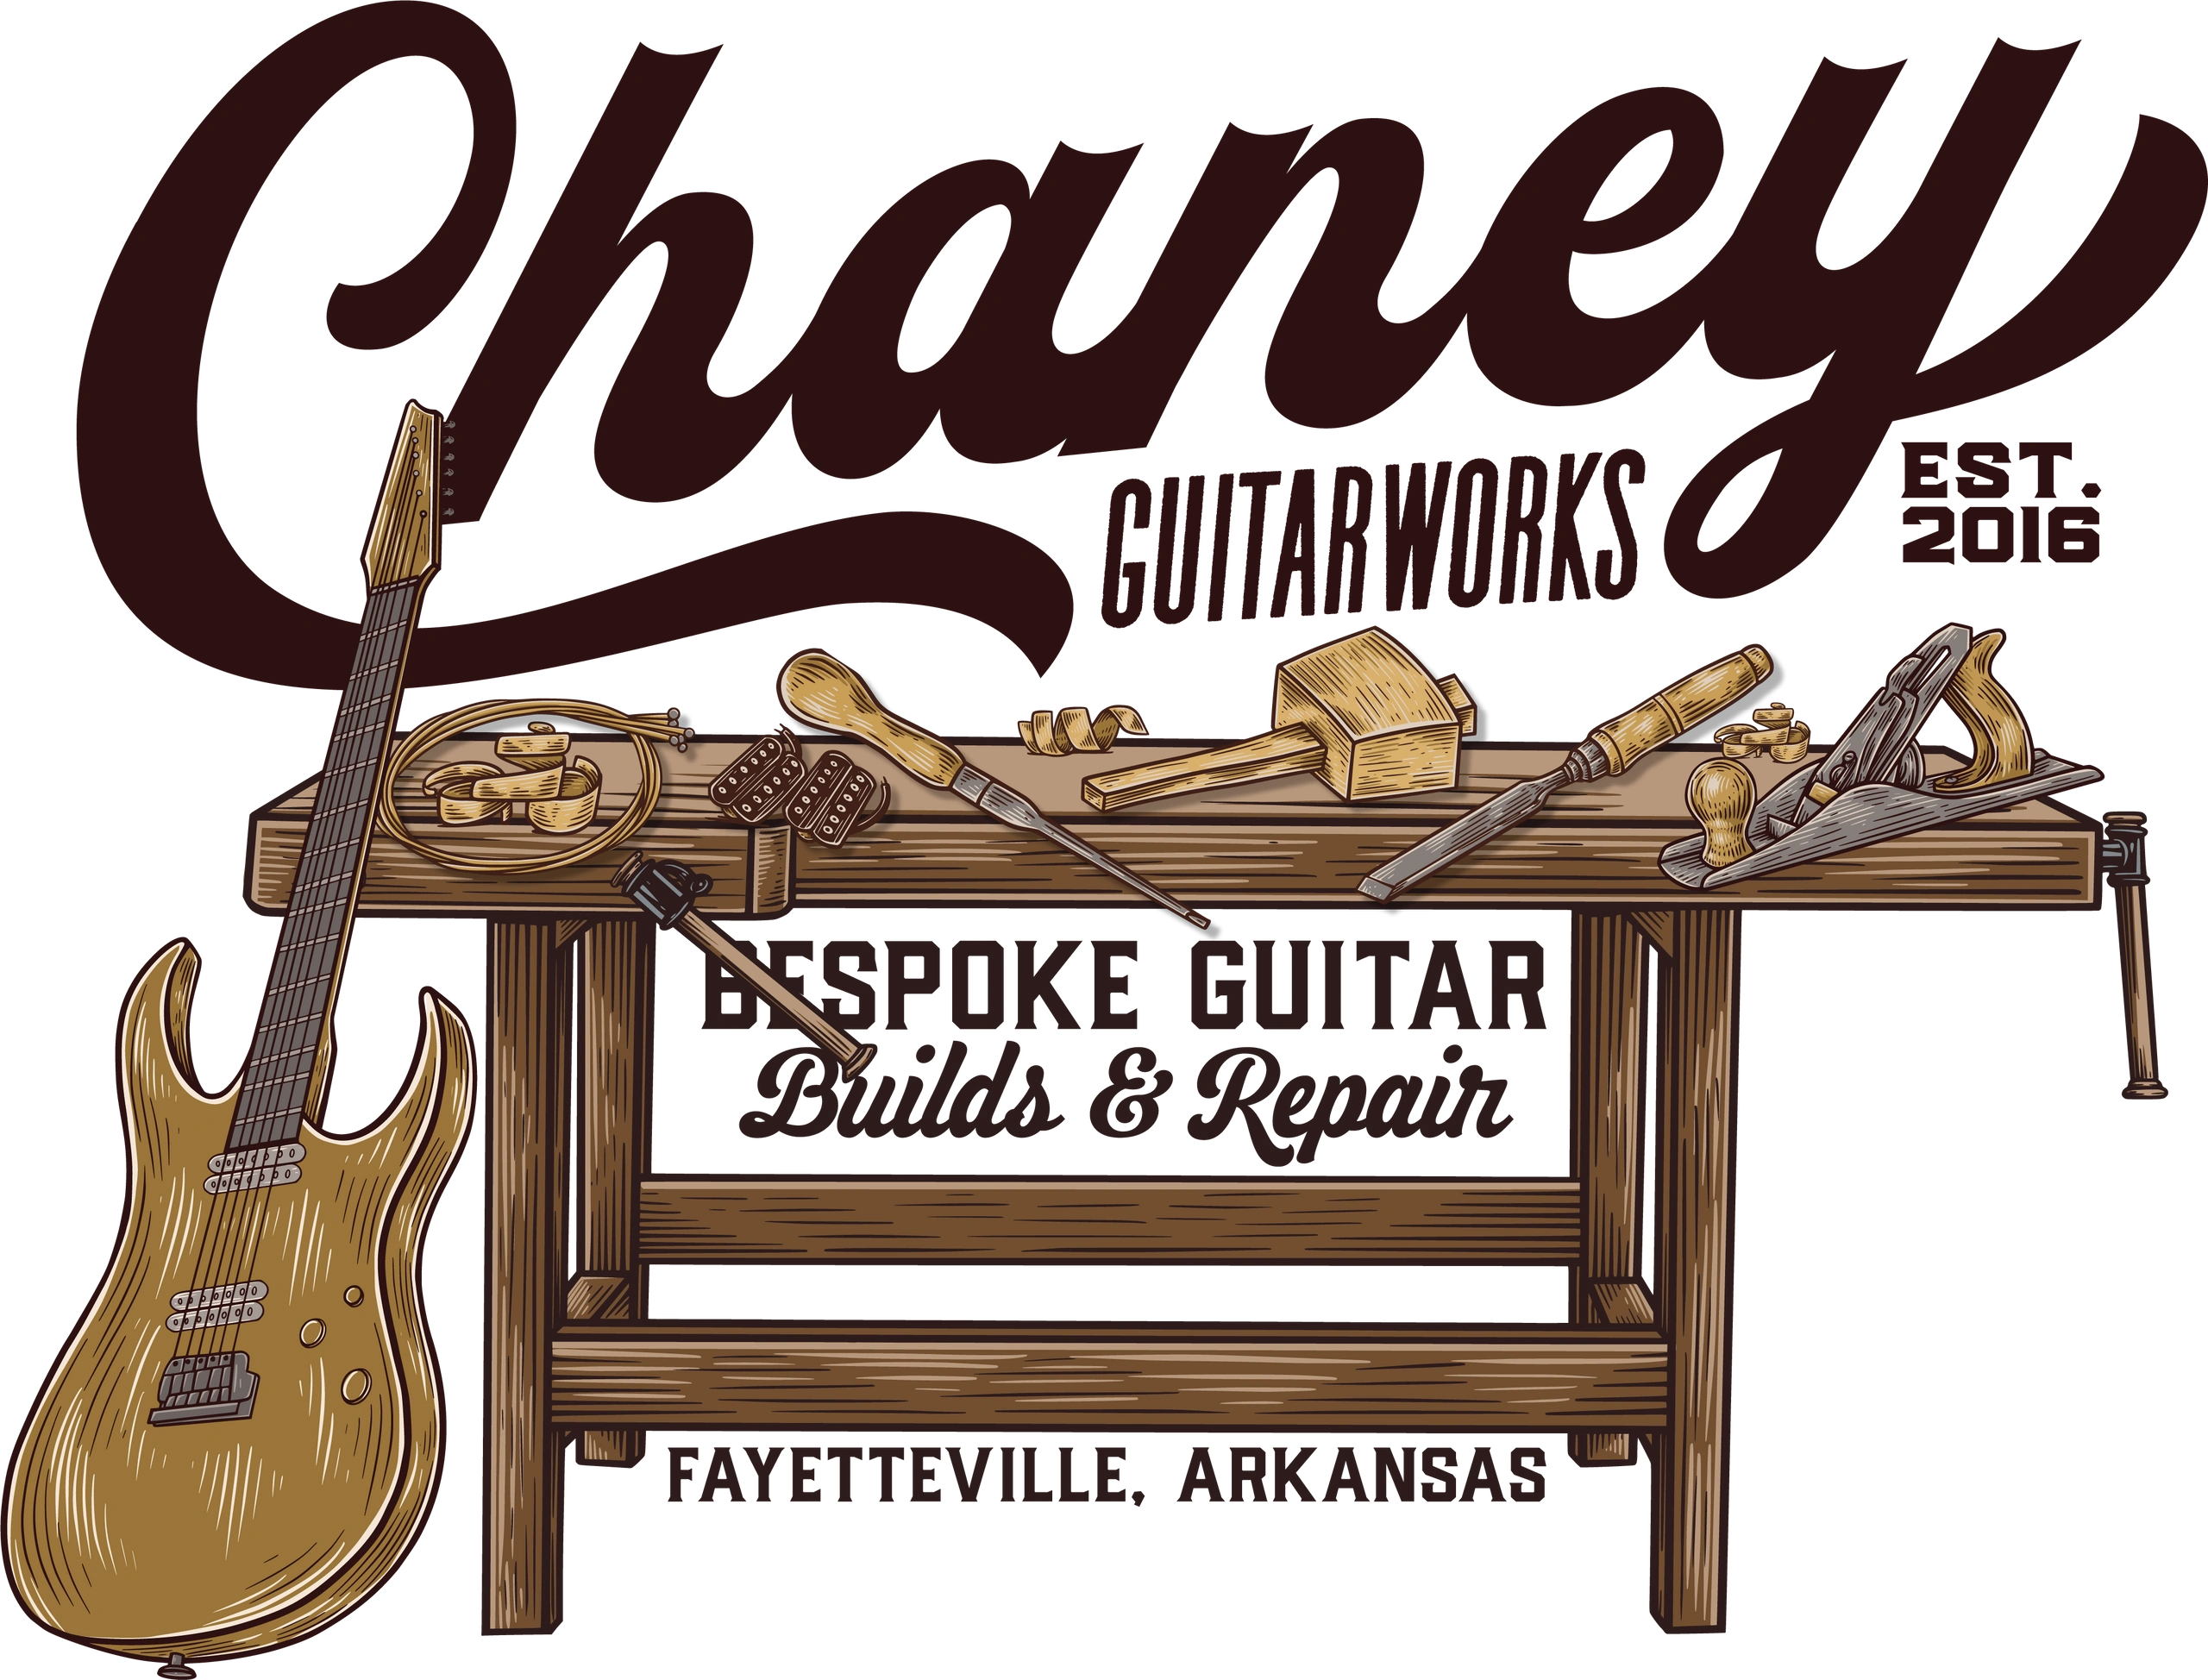 Chaney Guitars log; a guitar on a woodworking bench